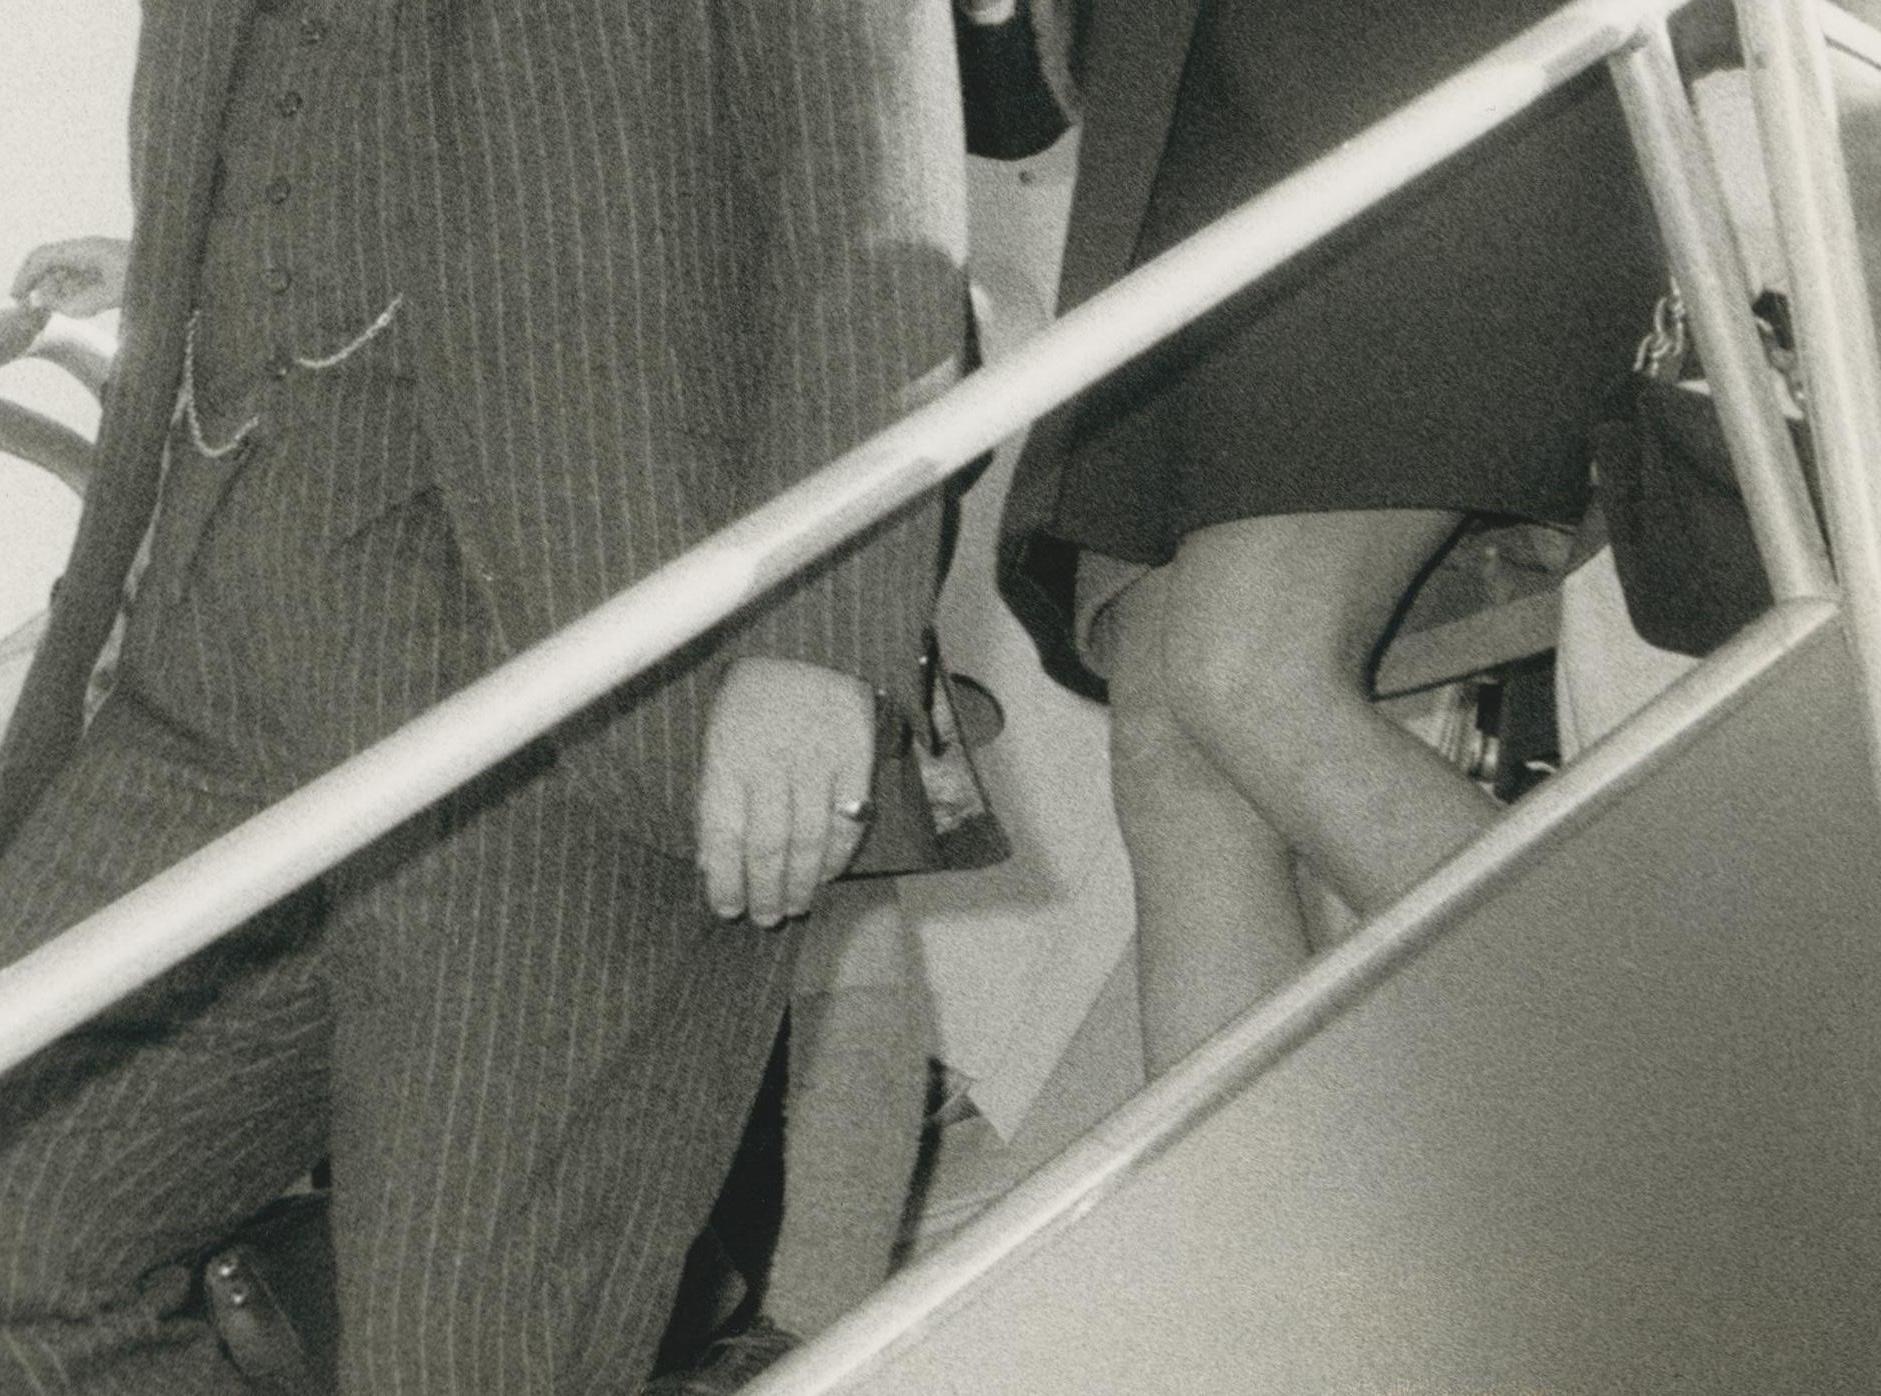 Jackie Kennedy leaving the plane, 1970s - Modern Photograph by Unknown